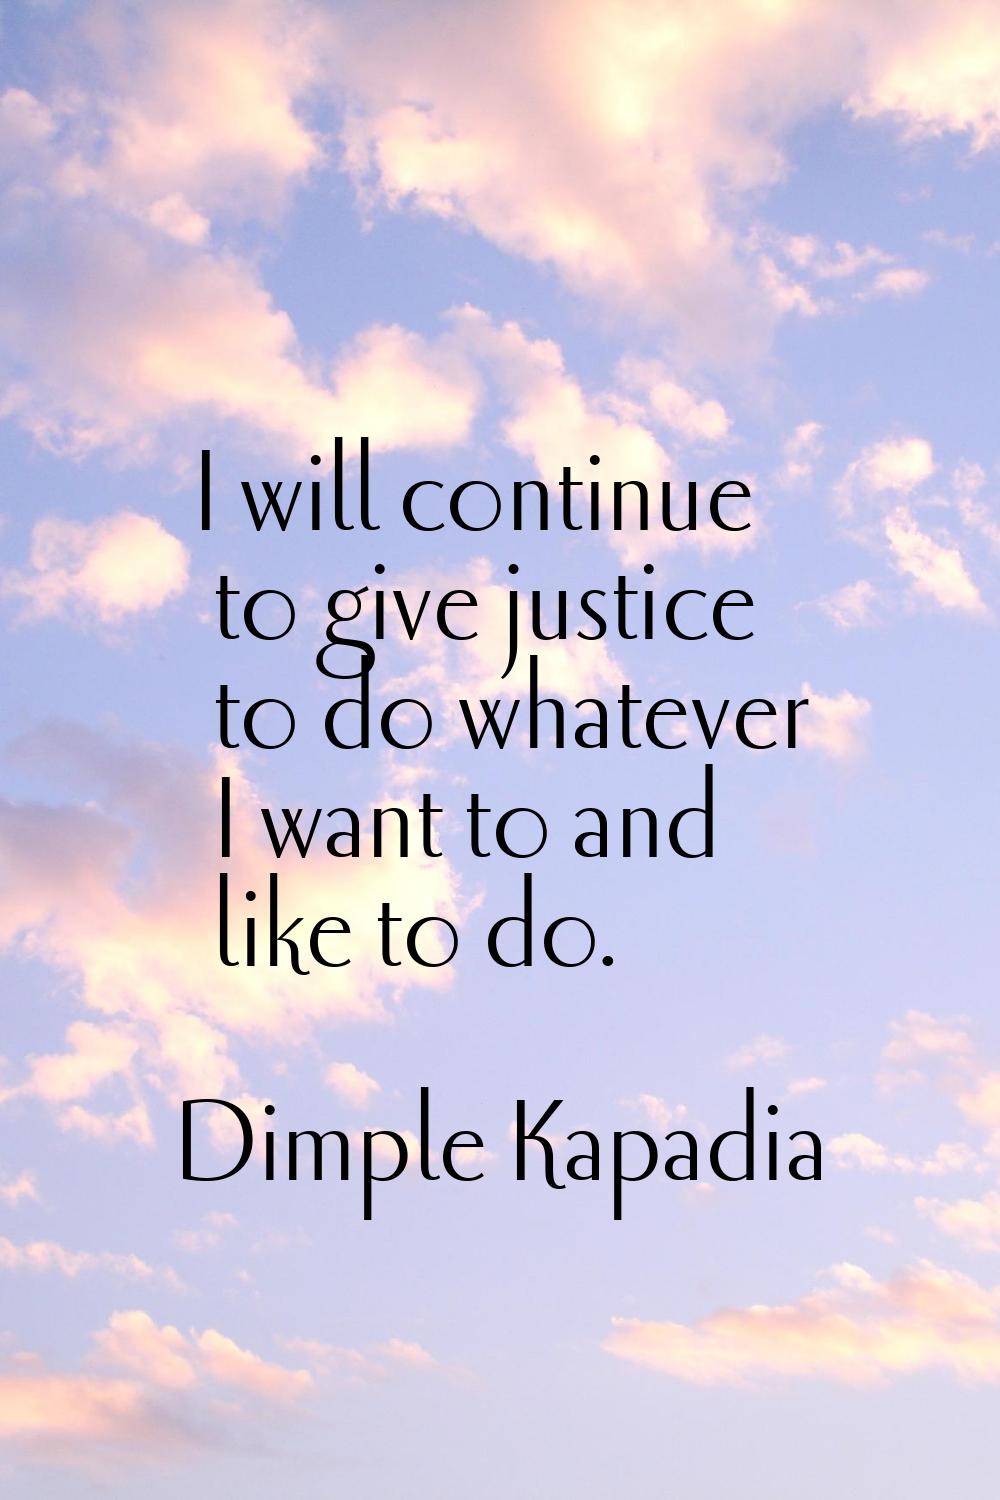 I will continue to give justice to do whatever I want to and like to do.